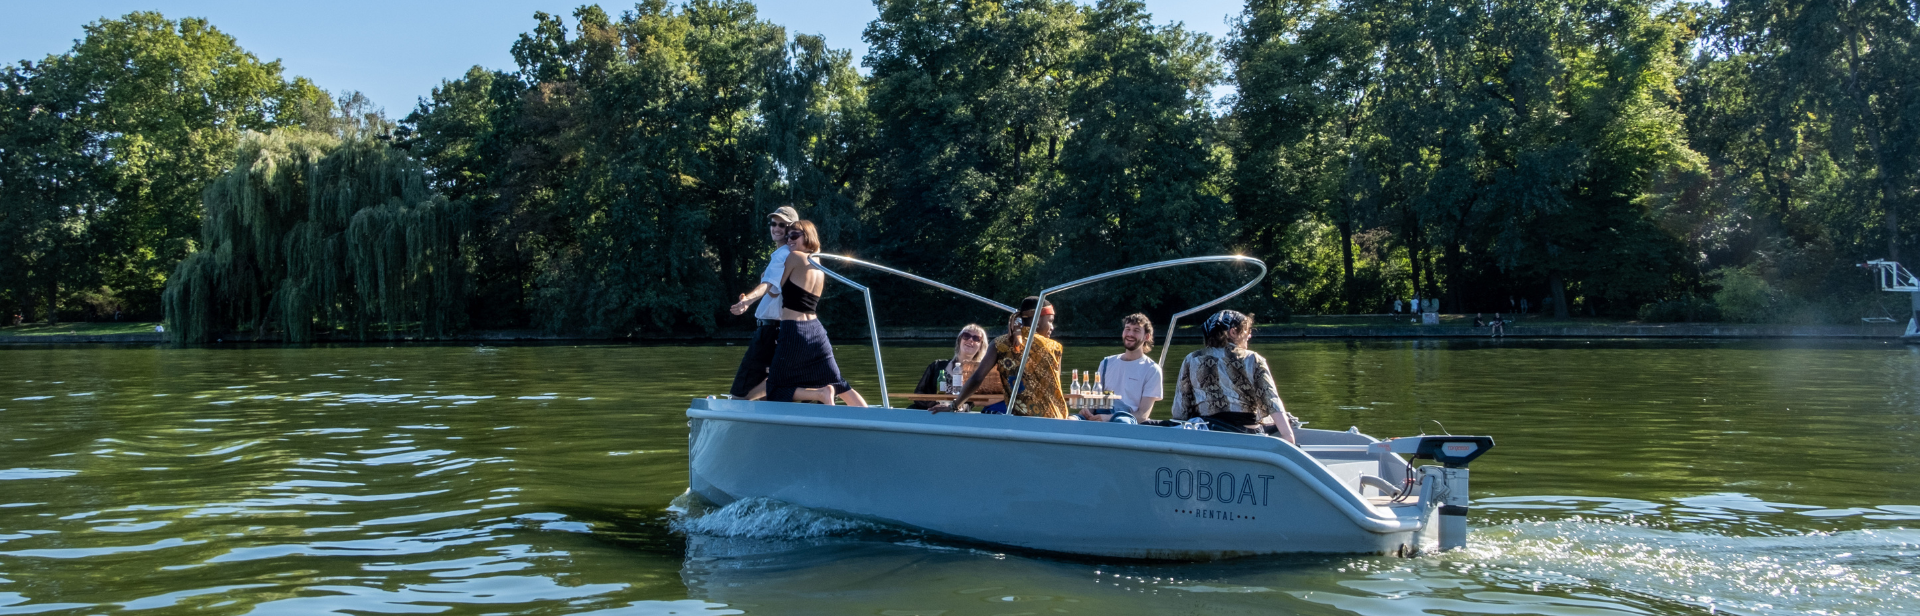 GoBoat experience